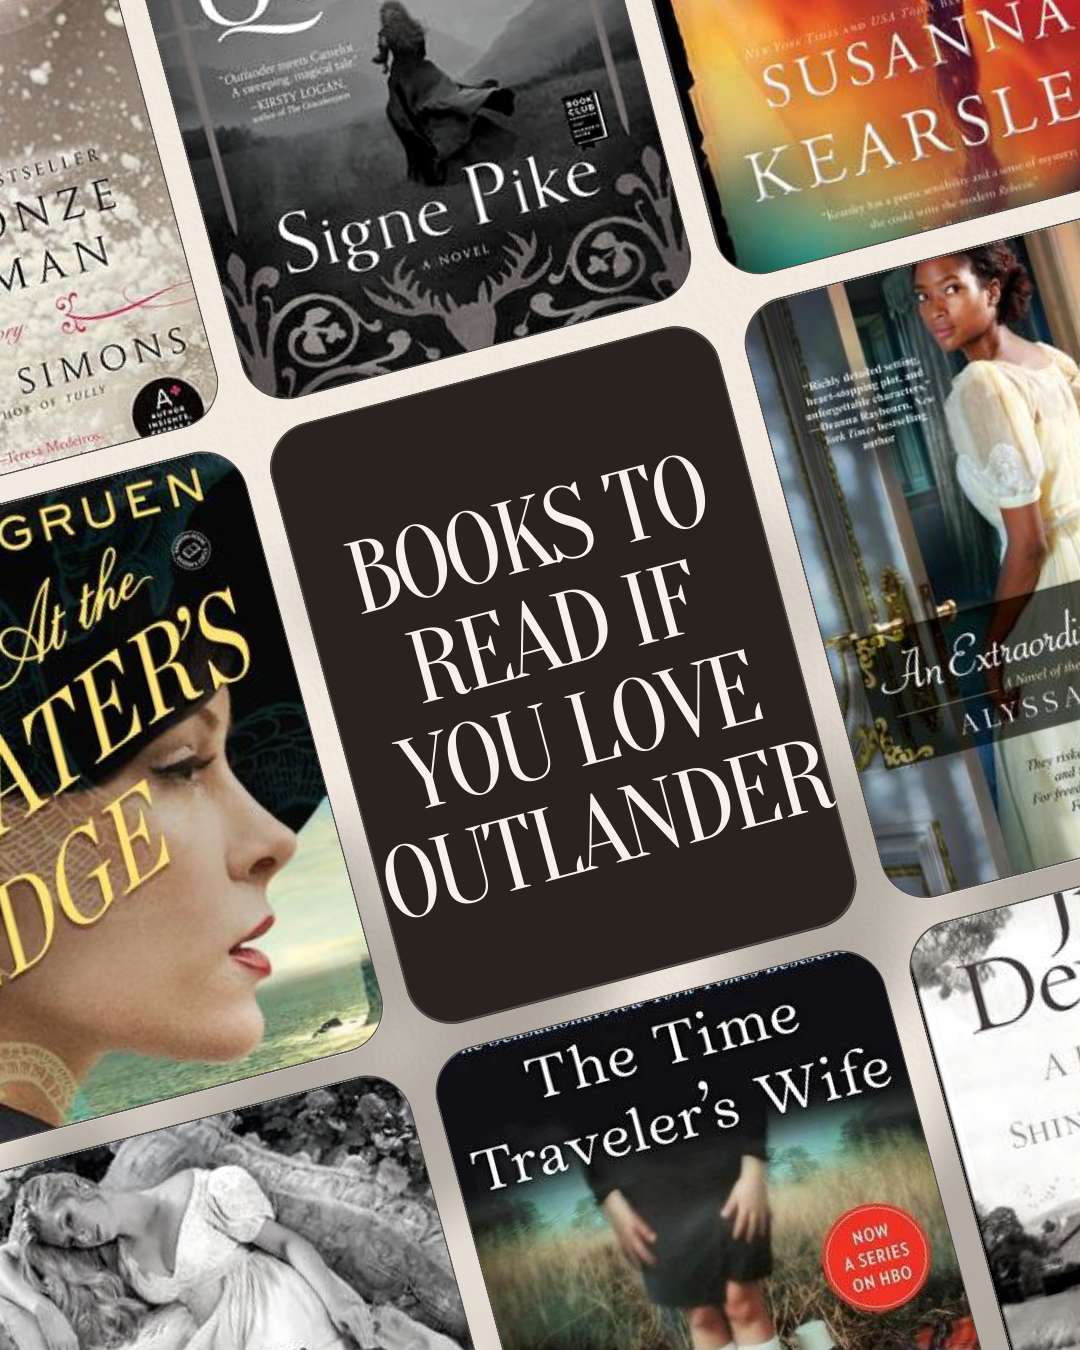 Preview of Books to Read If You Love Outlander